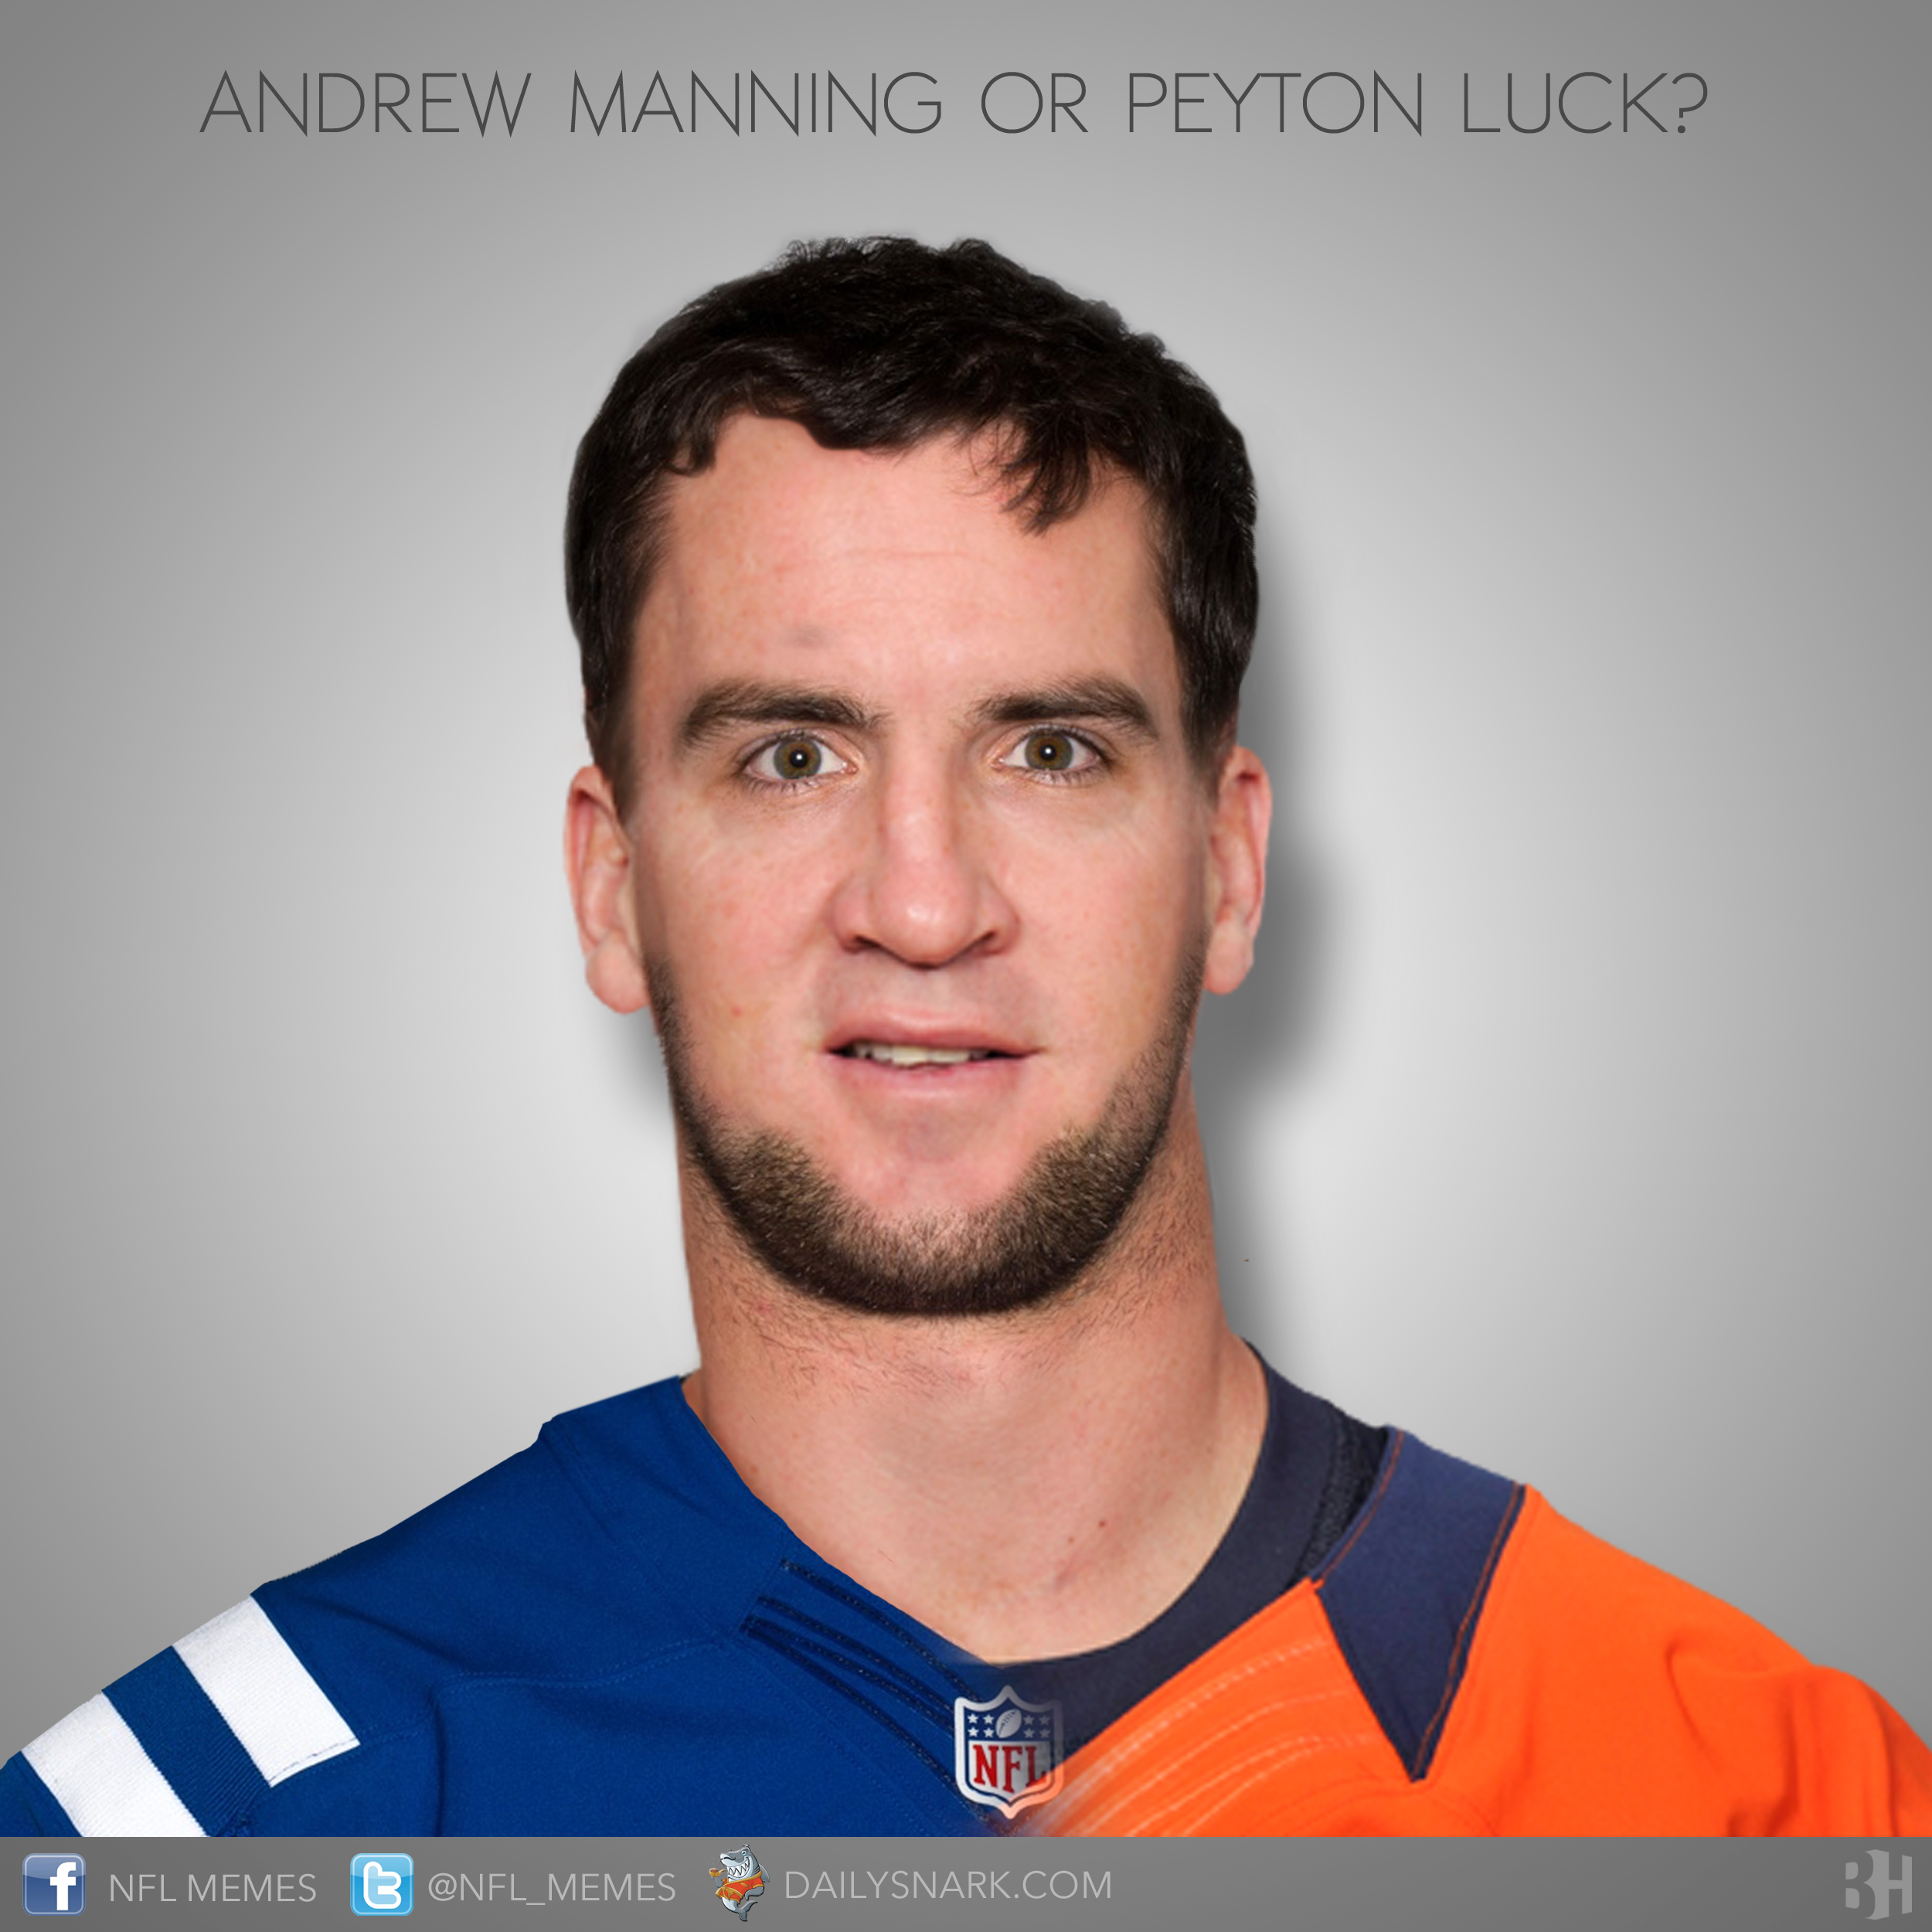 NFL Stars Morphed With Each Other - Daily Snark